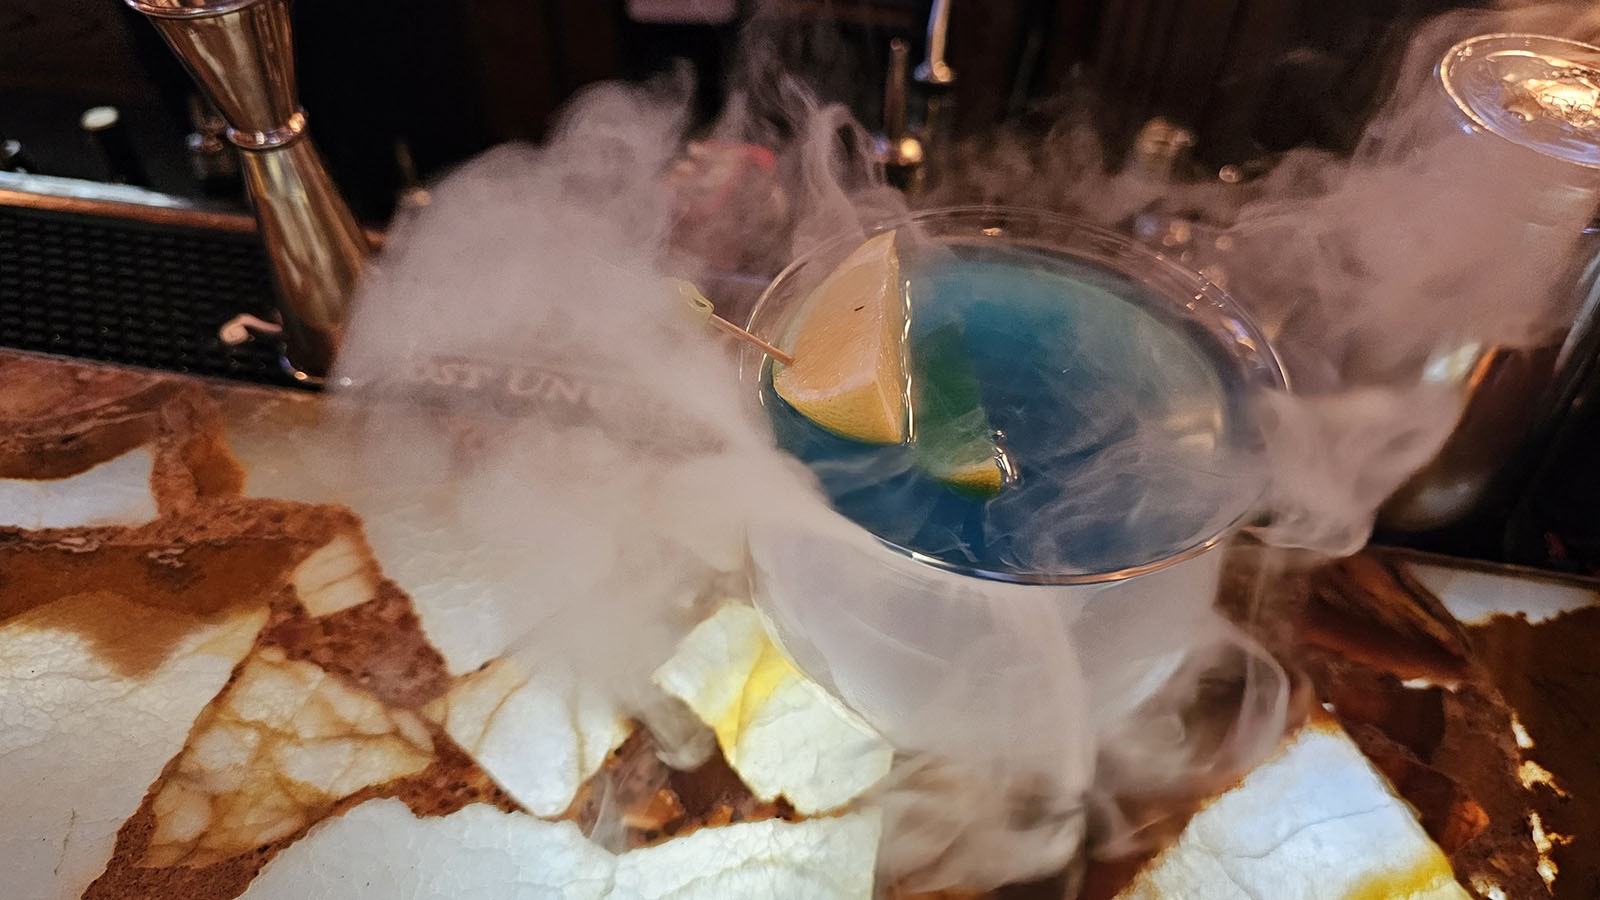 A smoking “dead guy” cocktail was among the creative drink options during Frozen Dead Guy Days in Estes Park, Colorado.